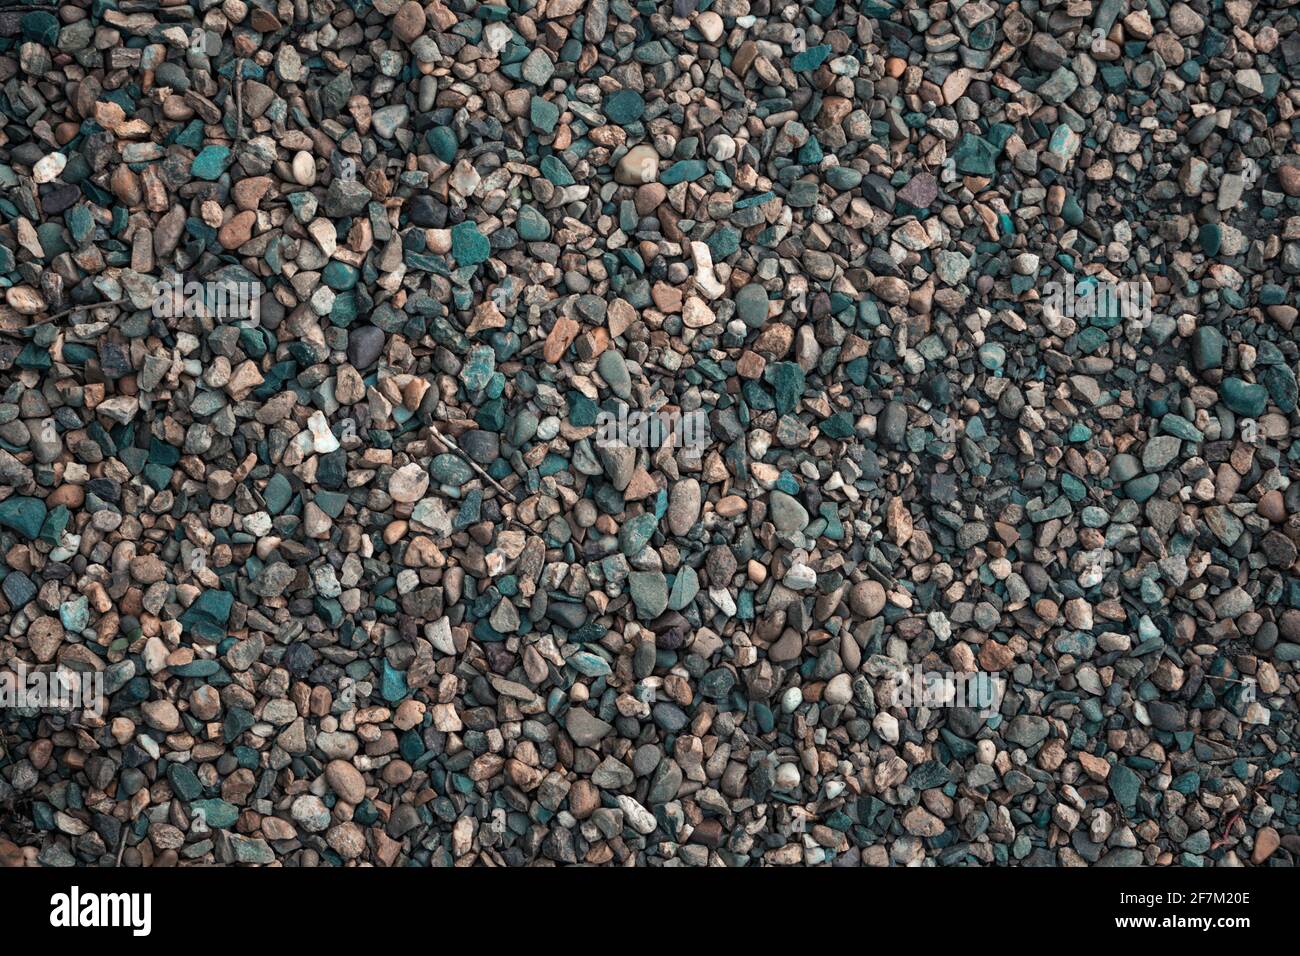 Gravel texture. Small stones, little rocks, pebbles in many shades of grey, white, brown, yellow colour. Background of small stones in oval shape. Tex Stock Photo